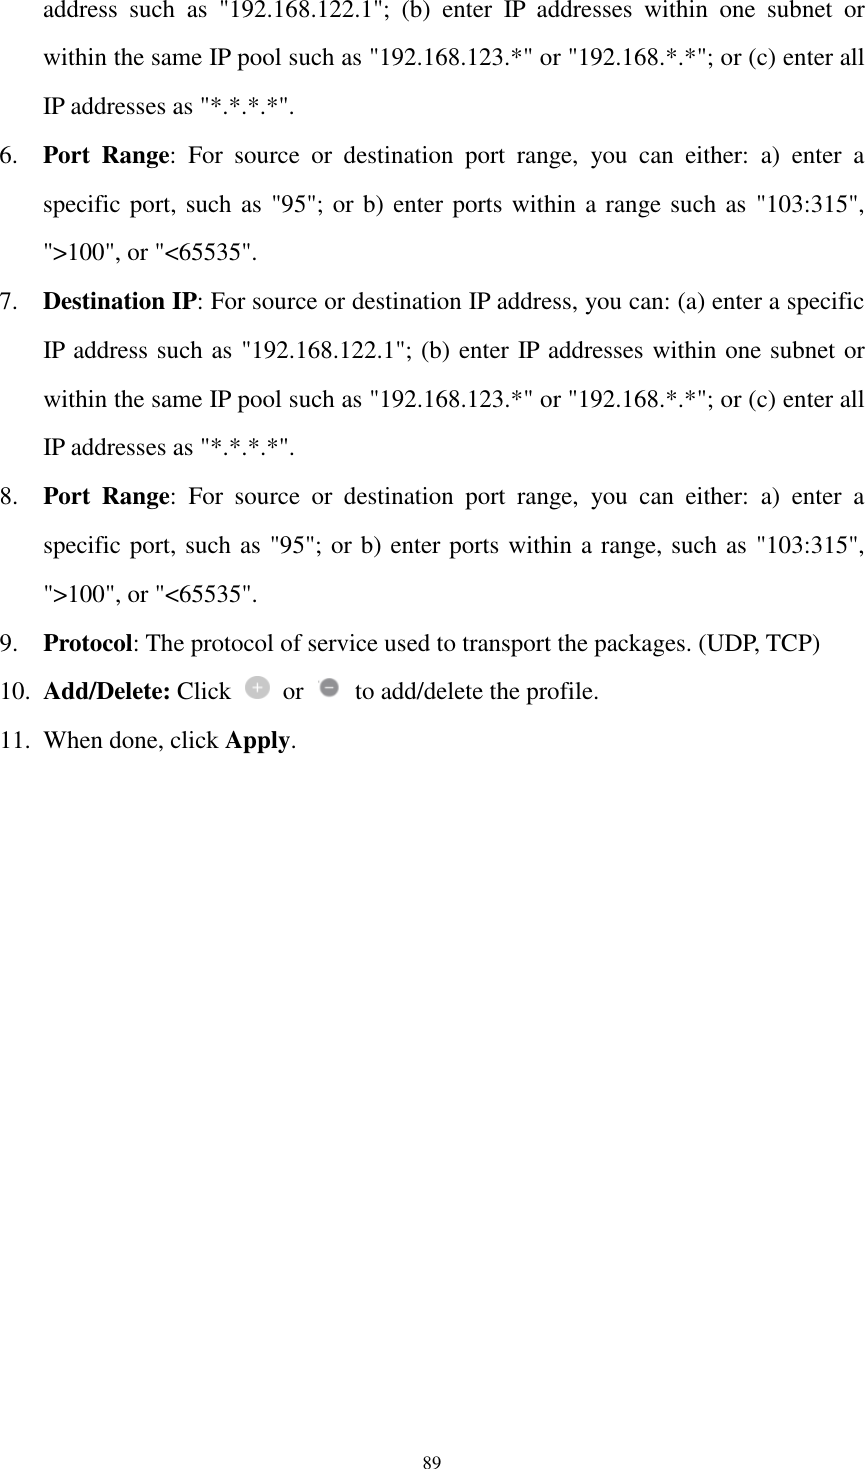  89 address  such  as  &quot;192.168.122.1&quot;;  (b)  enter  IP  addresses  within  one  subnet  or within the same IP pool such as &quot;192.168.123.*&quot; or &quot;192.168.*.*&quot;; or (c) enter all IP addresses as &quot;*.*.*.*&quot;. 6. Port  Range:  For  source  or  destination  port  range,  you  can  either:  a)  enter  a specific port, such as &quot;95&quot;; or b) enter ports within a range such as &quot;103:315&quot;, &quot;&gt;100&quot;, or &quot;&lt;65535&quot;. 7. Destination IP: For source or destination IP address, you can: (a) enter a specific IP address such as &quot;192.168.122.1&quot;; (b) enter IP addresses within one subnet or within the same IP pool such as &quot;192.168.123.*&quot; or &quot;192.168.*.*&quot;; or (c) enter all IP addresses as &quot;*.*.*.*&quot;. 8. Port  Range:  For  source  or  destination  port  range,  you  can  either:  a)  enter  a specific port, such as &quot;95&quot;; or b) enter ports within a range, such as &quot;103:315&quot;, &quot;&gt;100&quot;, or &quot;&lt;65535&quot;. 9. Protocol: The protocol of service used to transport the packages. (UDP, TCP) 10. Add/Delete: Click    or    to add/delete the profile. 11. When done, click Apply.  